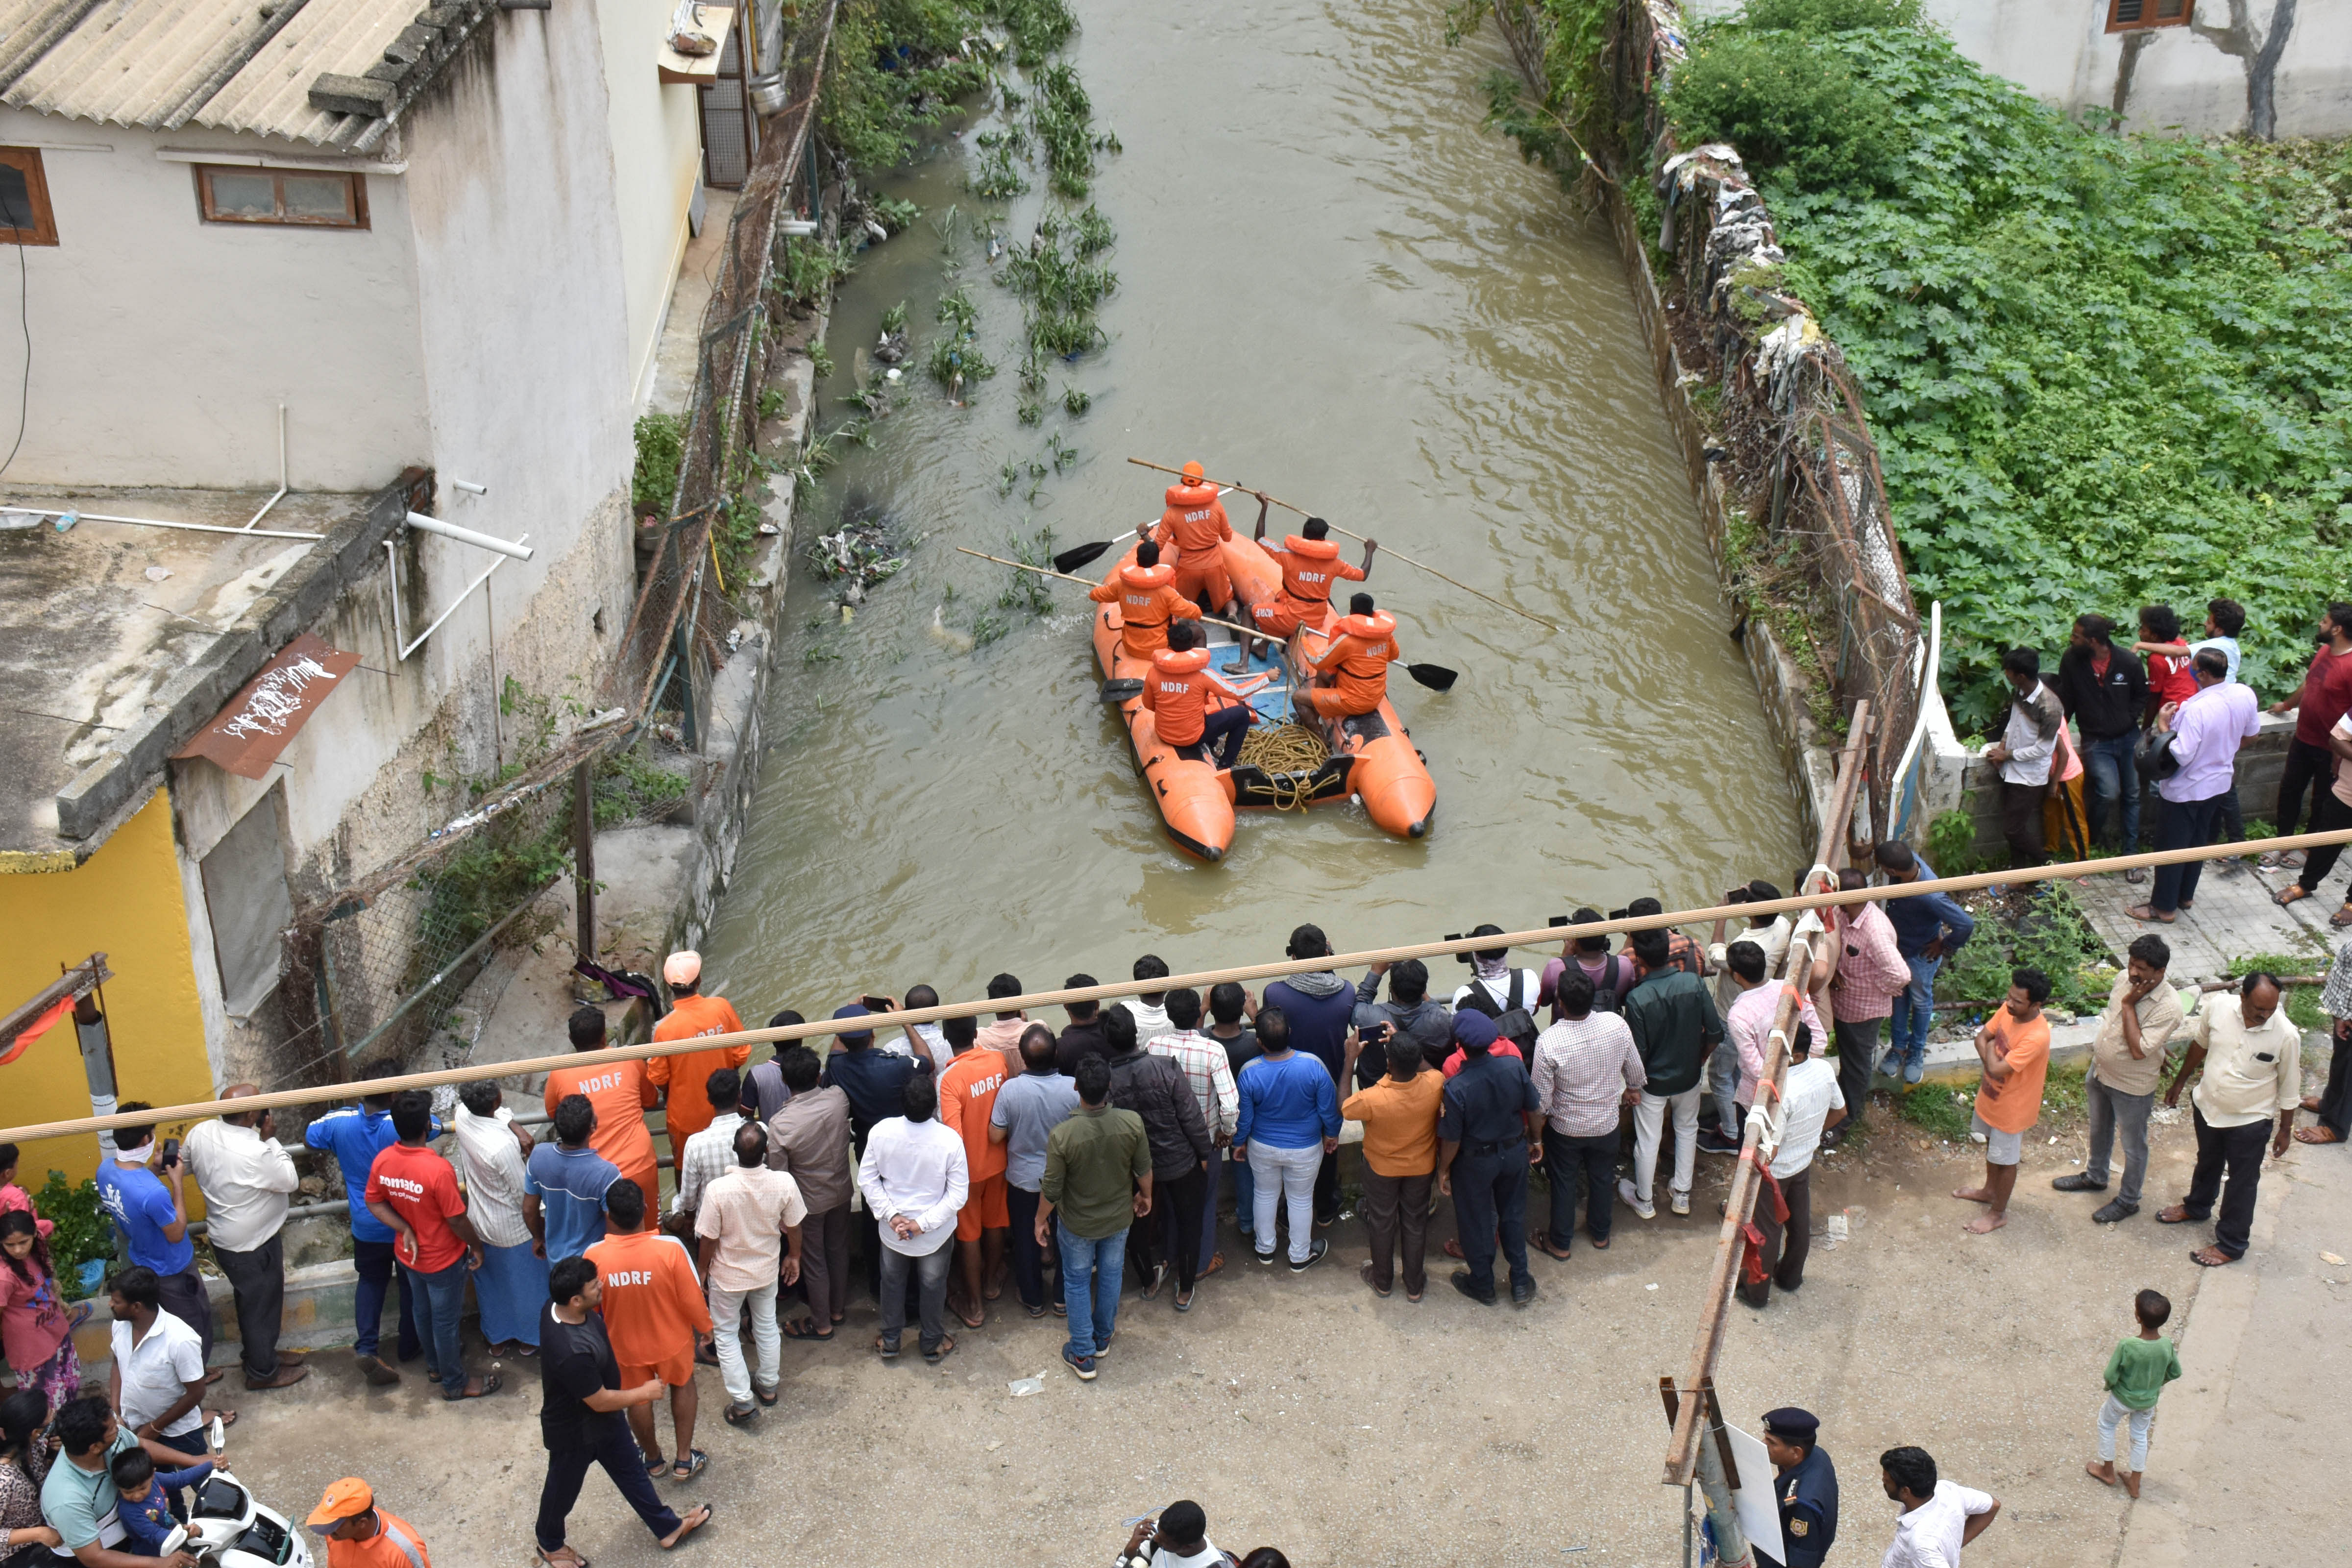 National Disaster Rescue Force (NDRF) search for the missing man who fell into a stormwater drain at the Gayathri layout in Whitefield late last night after heavy rain fall in Bengaluru on Saturday. Credit: DH Photo by BK Janardhan